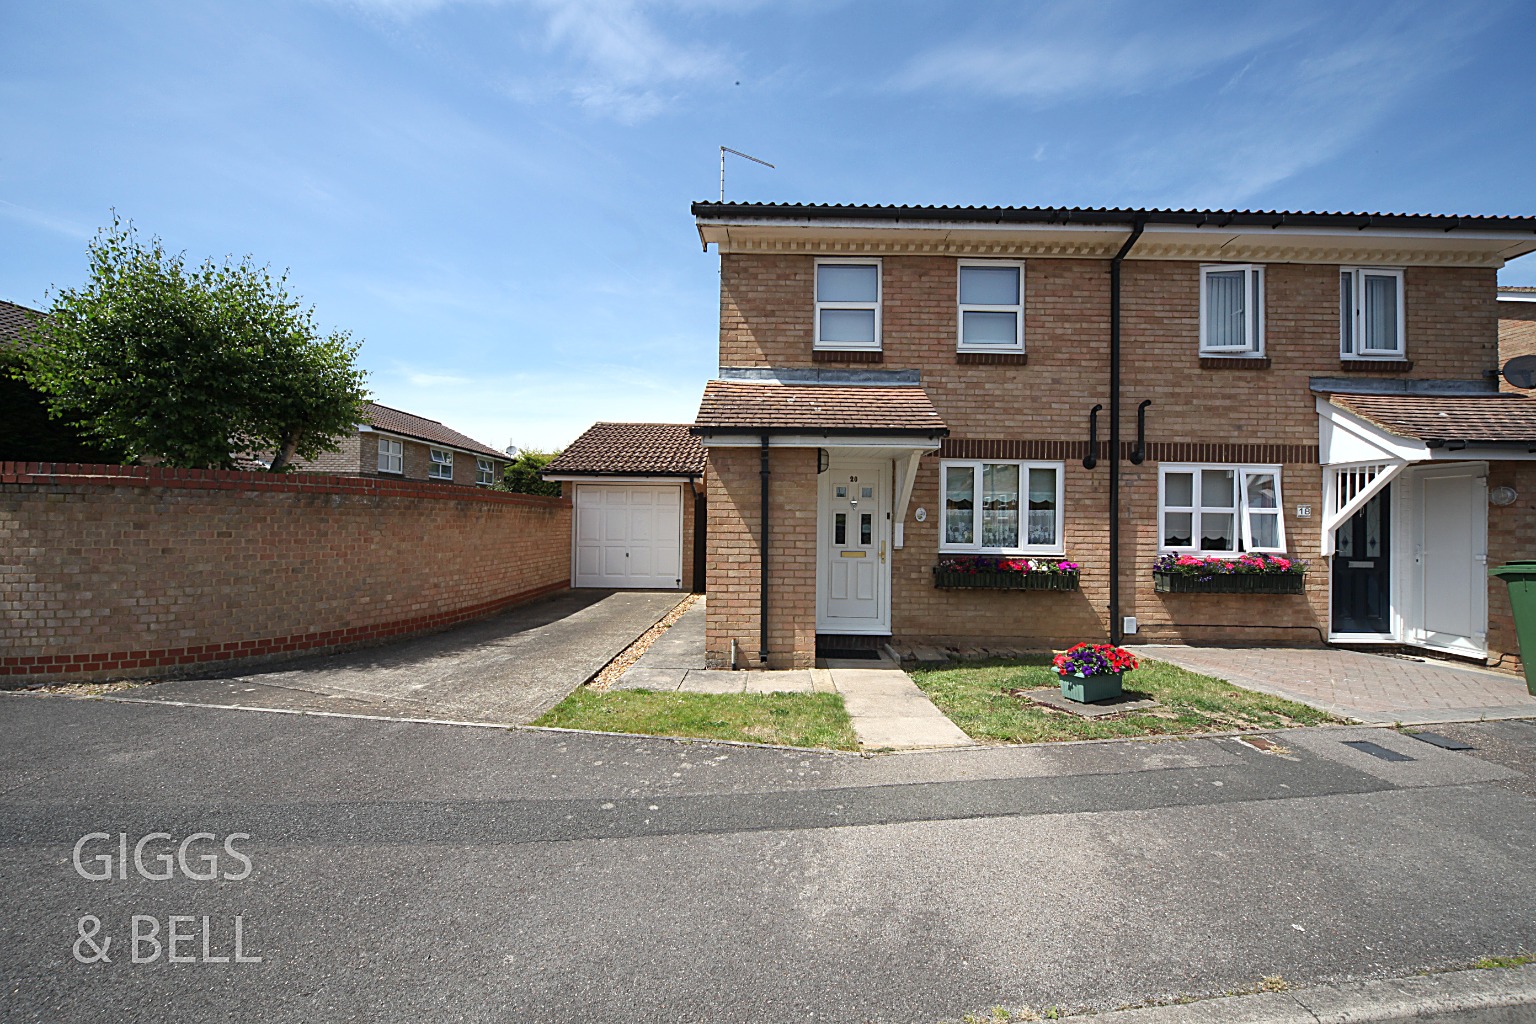 2 bed semi-detached house for sale in Rushall Green, Luton, LU2 